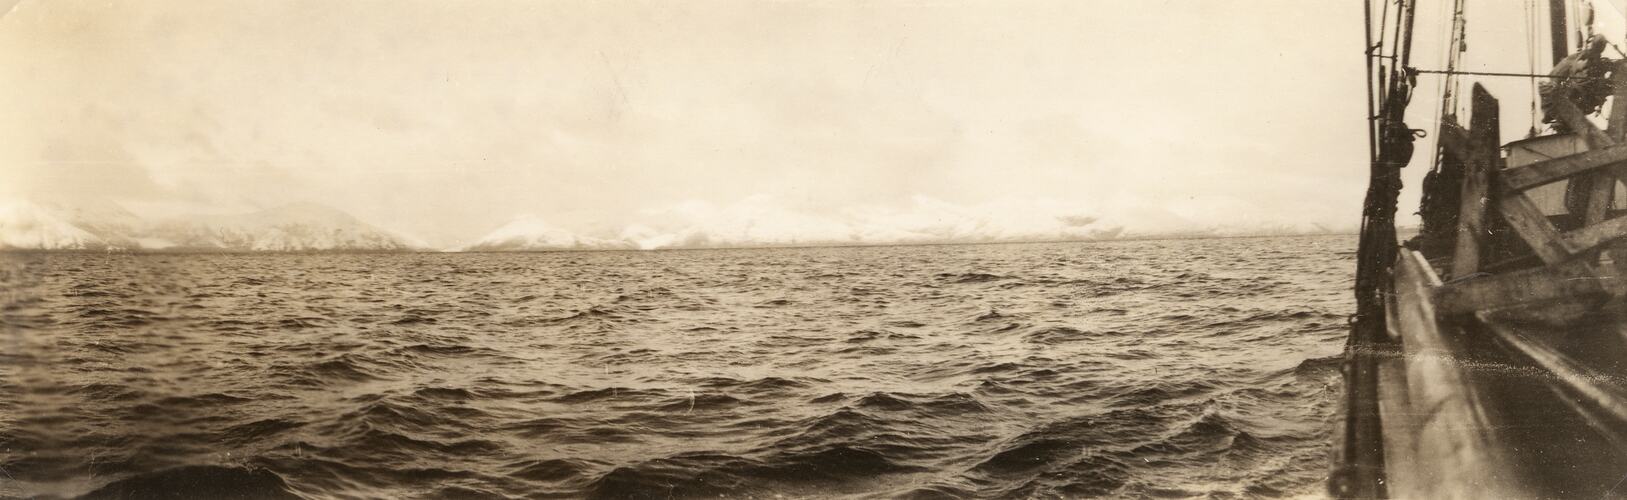 View of Keats Sound taken aboard the 'Fortunato Viego', May 7th, 1929.